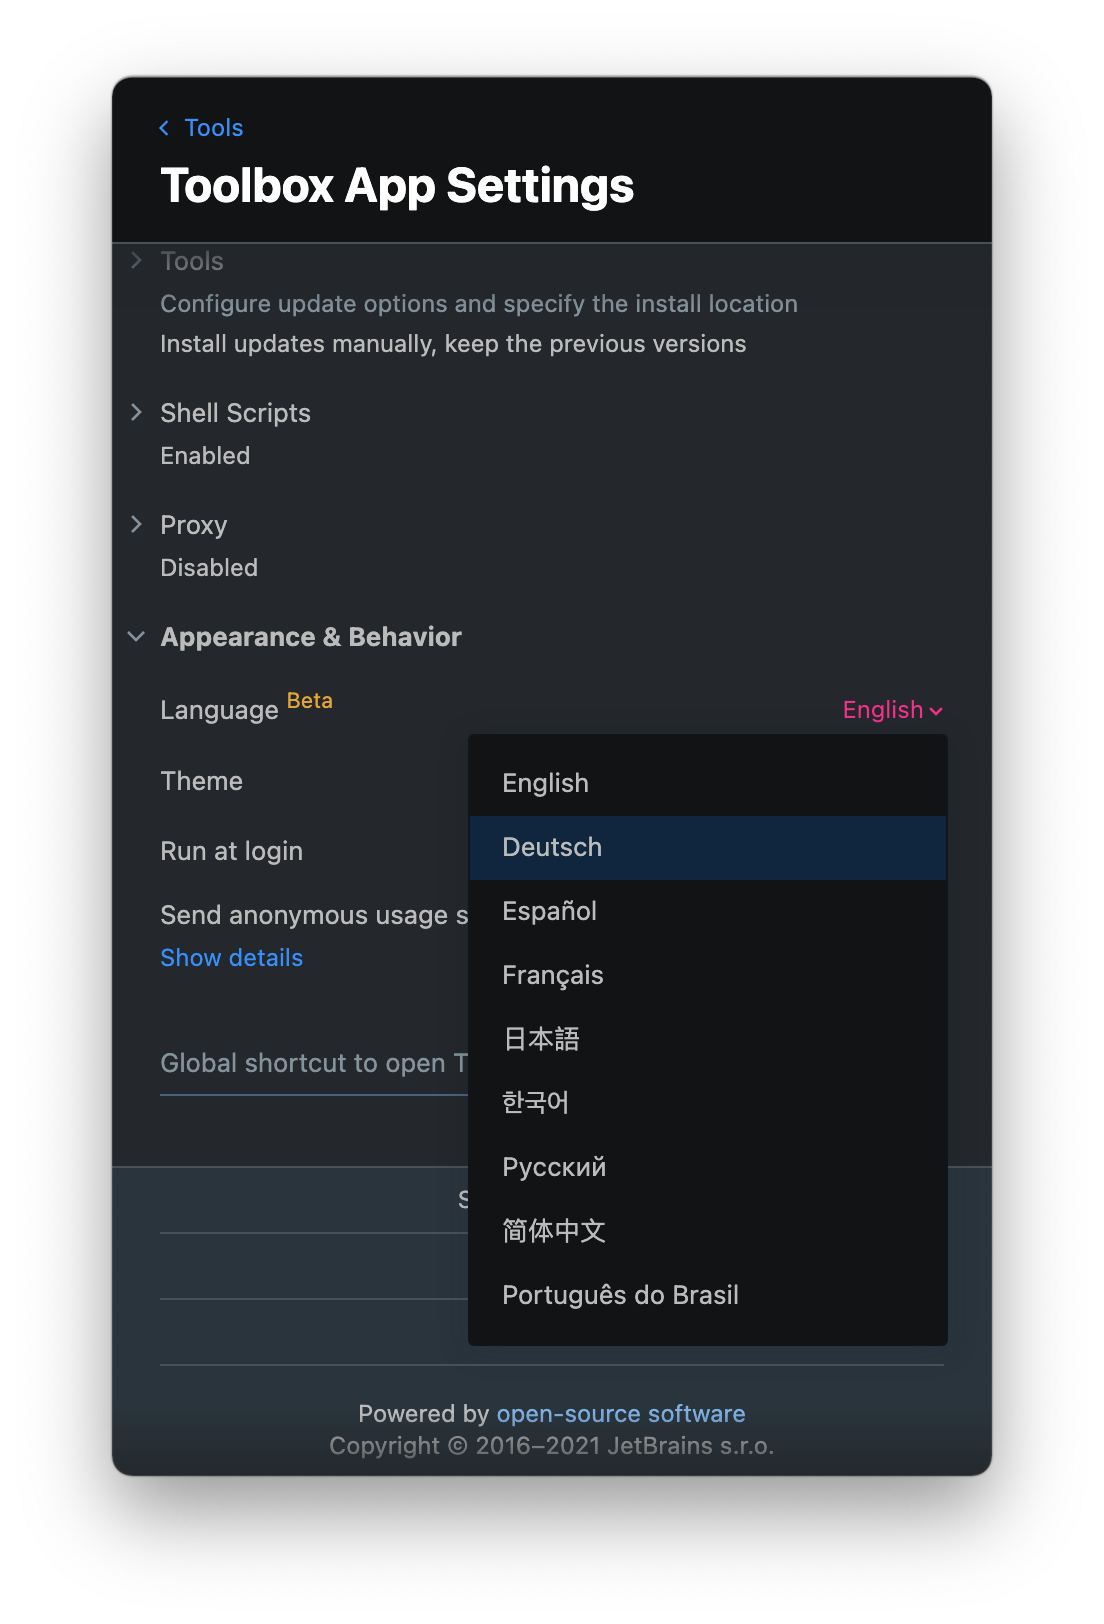 Localization in Toolbox App